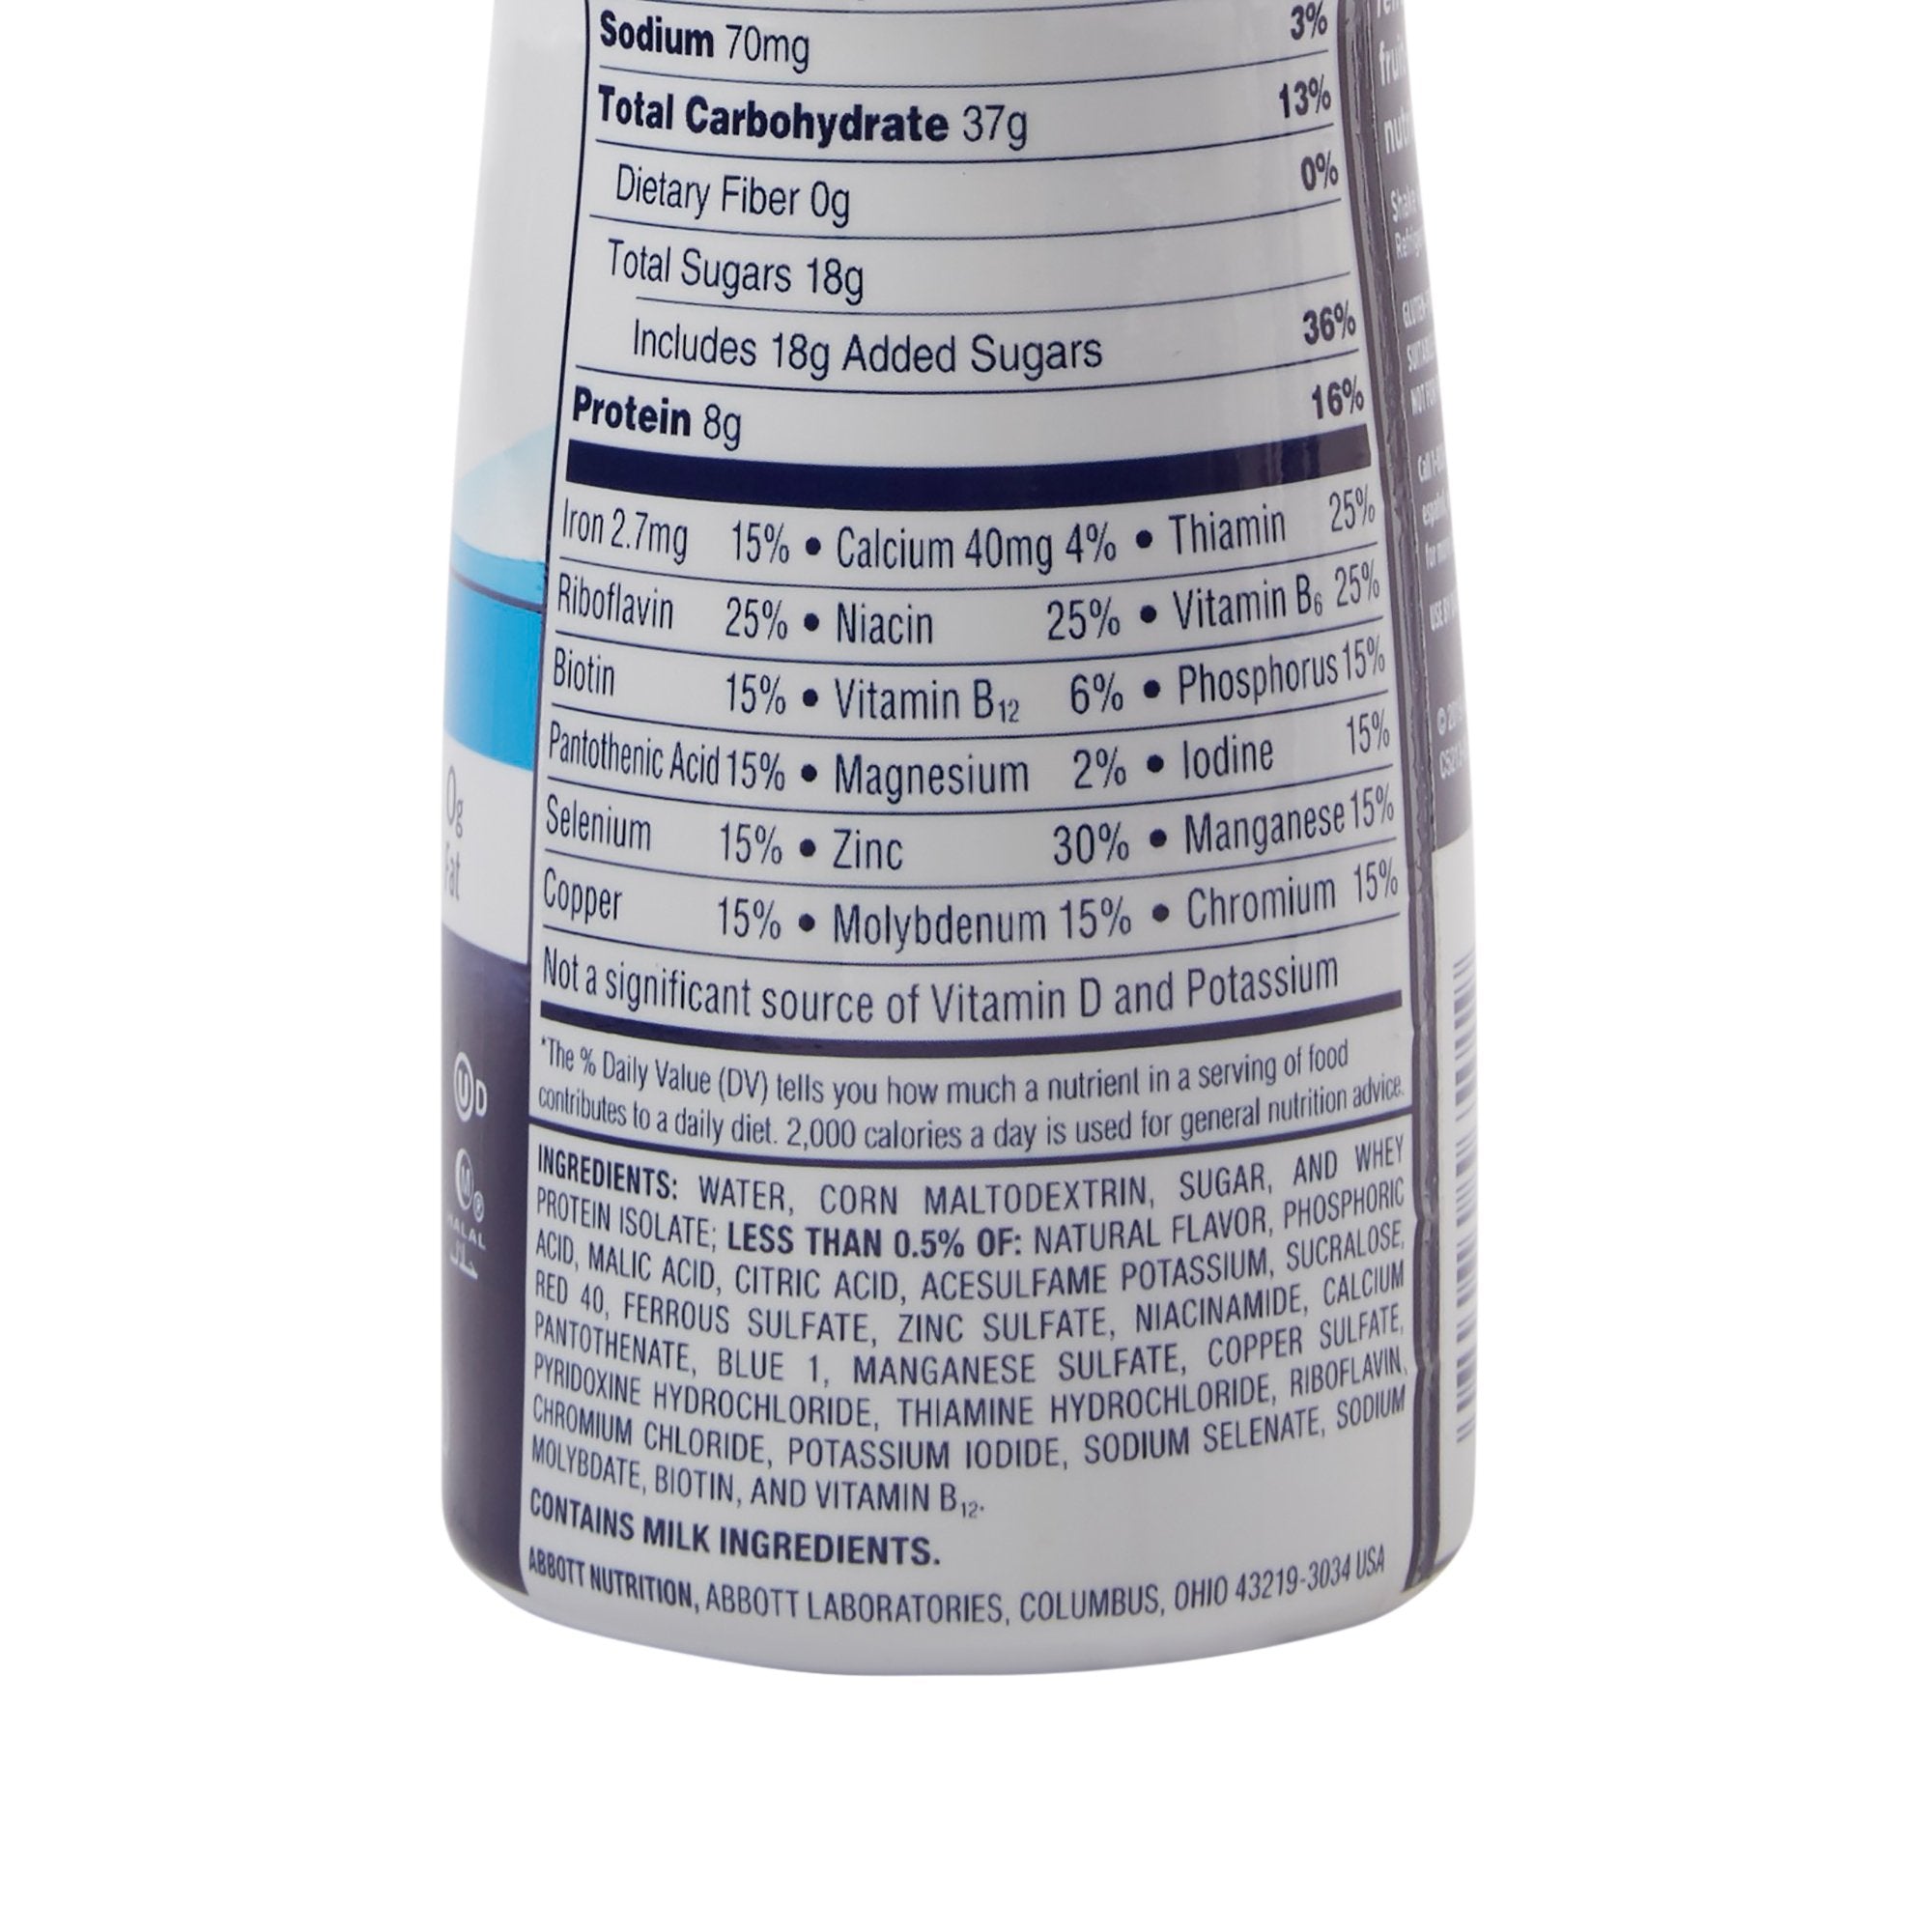 Ensure® Clear Blueberry Pomegranate Nutrition Drink, 10oz - Health Supplement